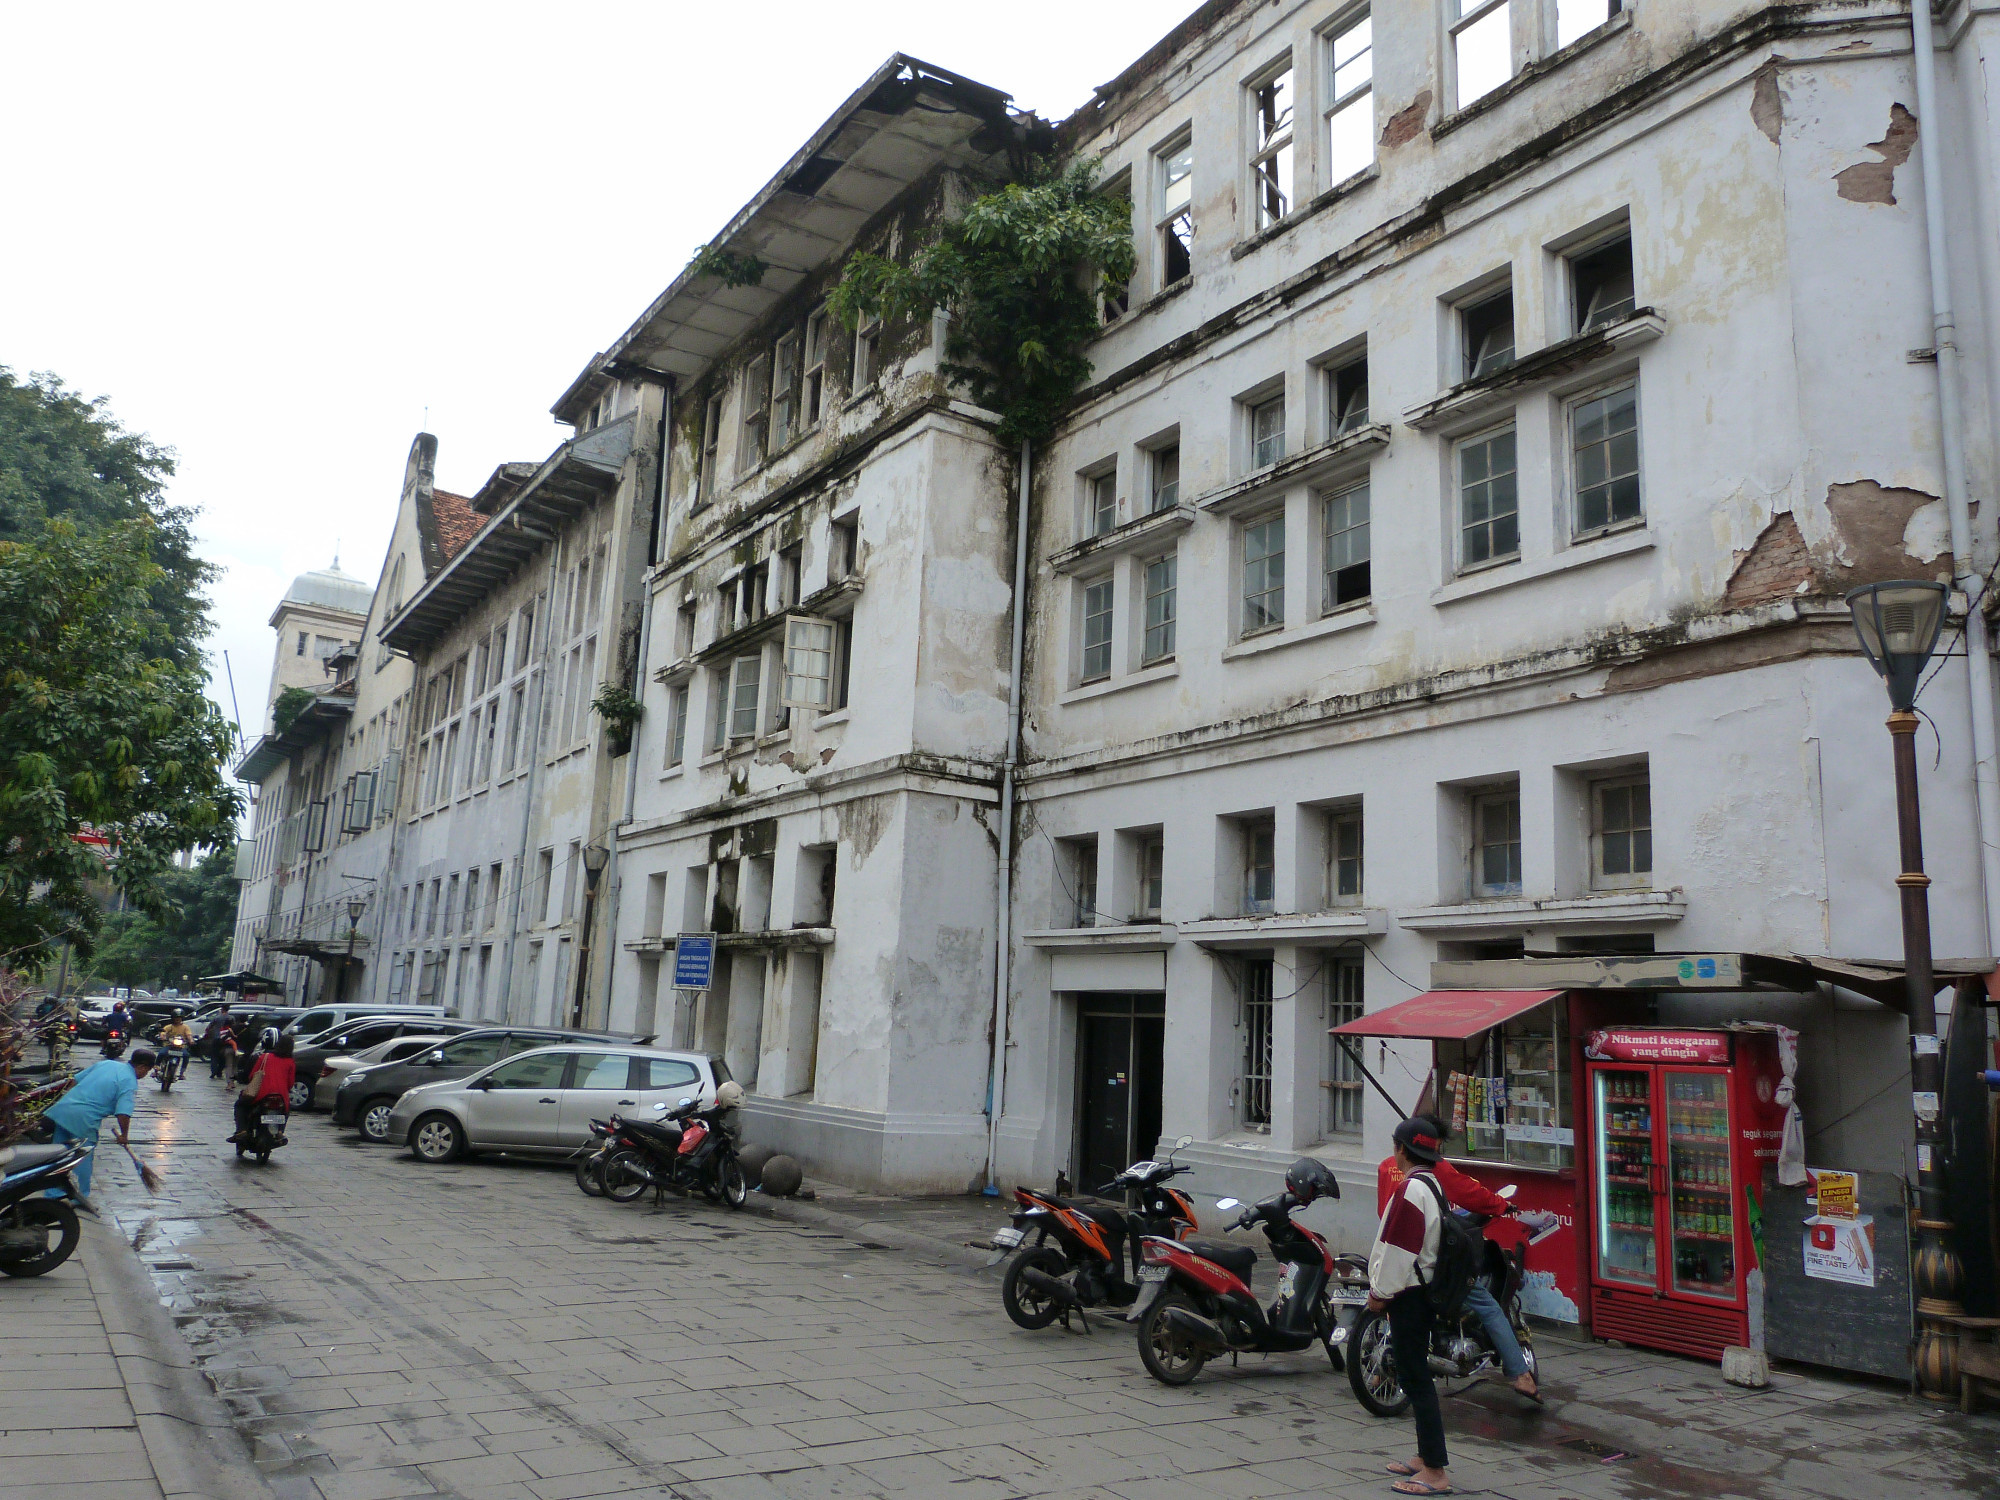 Kantor Pos Post Office, old Dutch colonial Centre